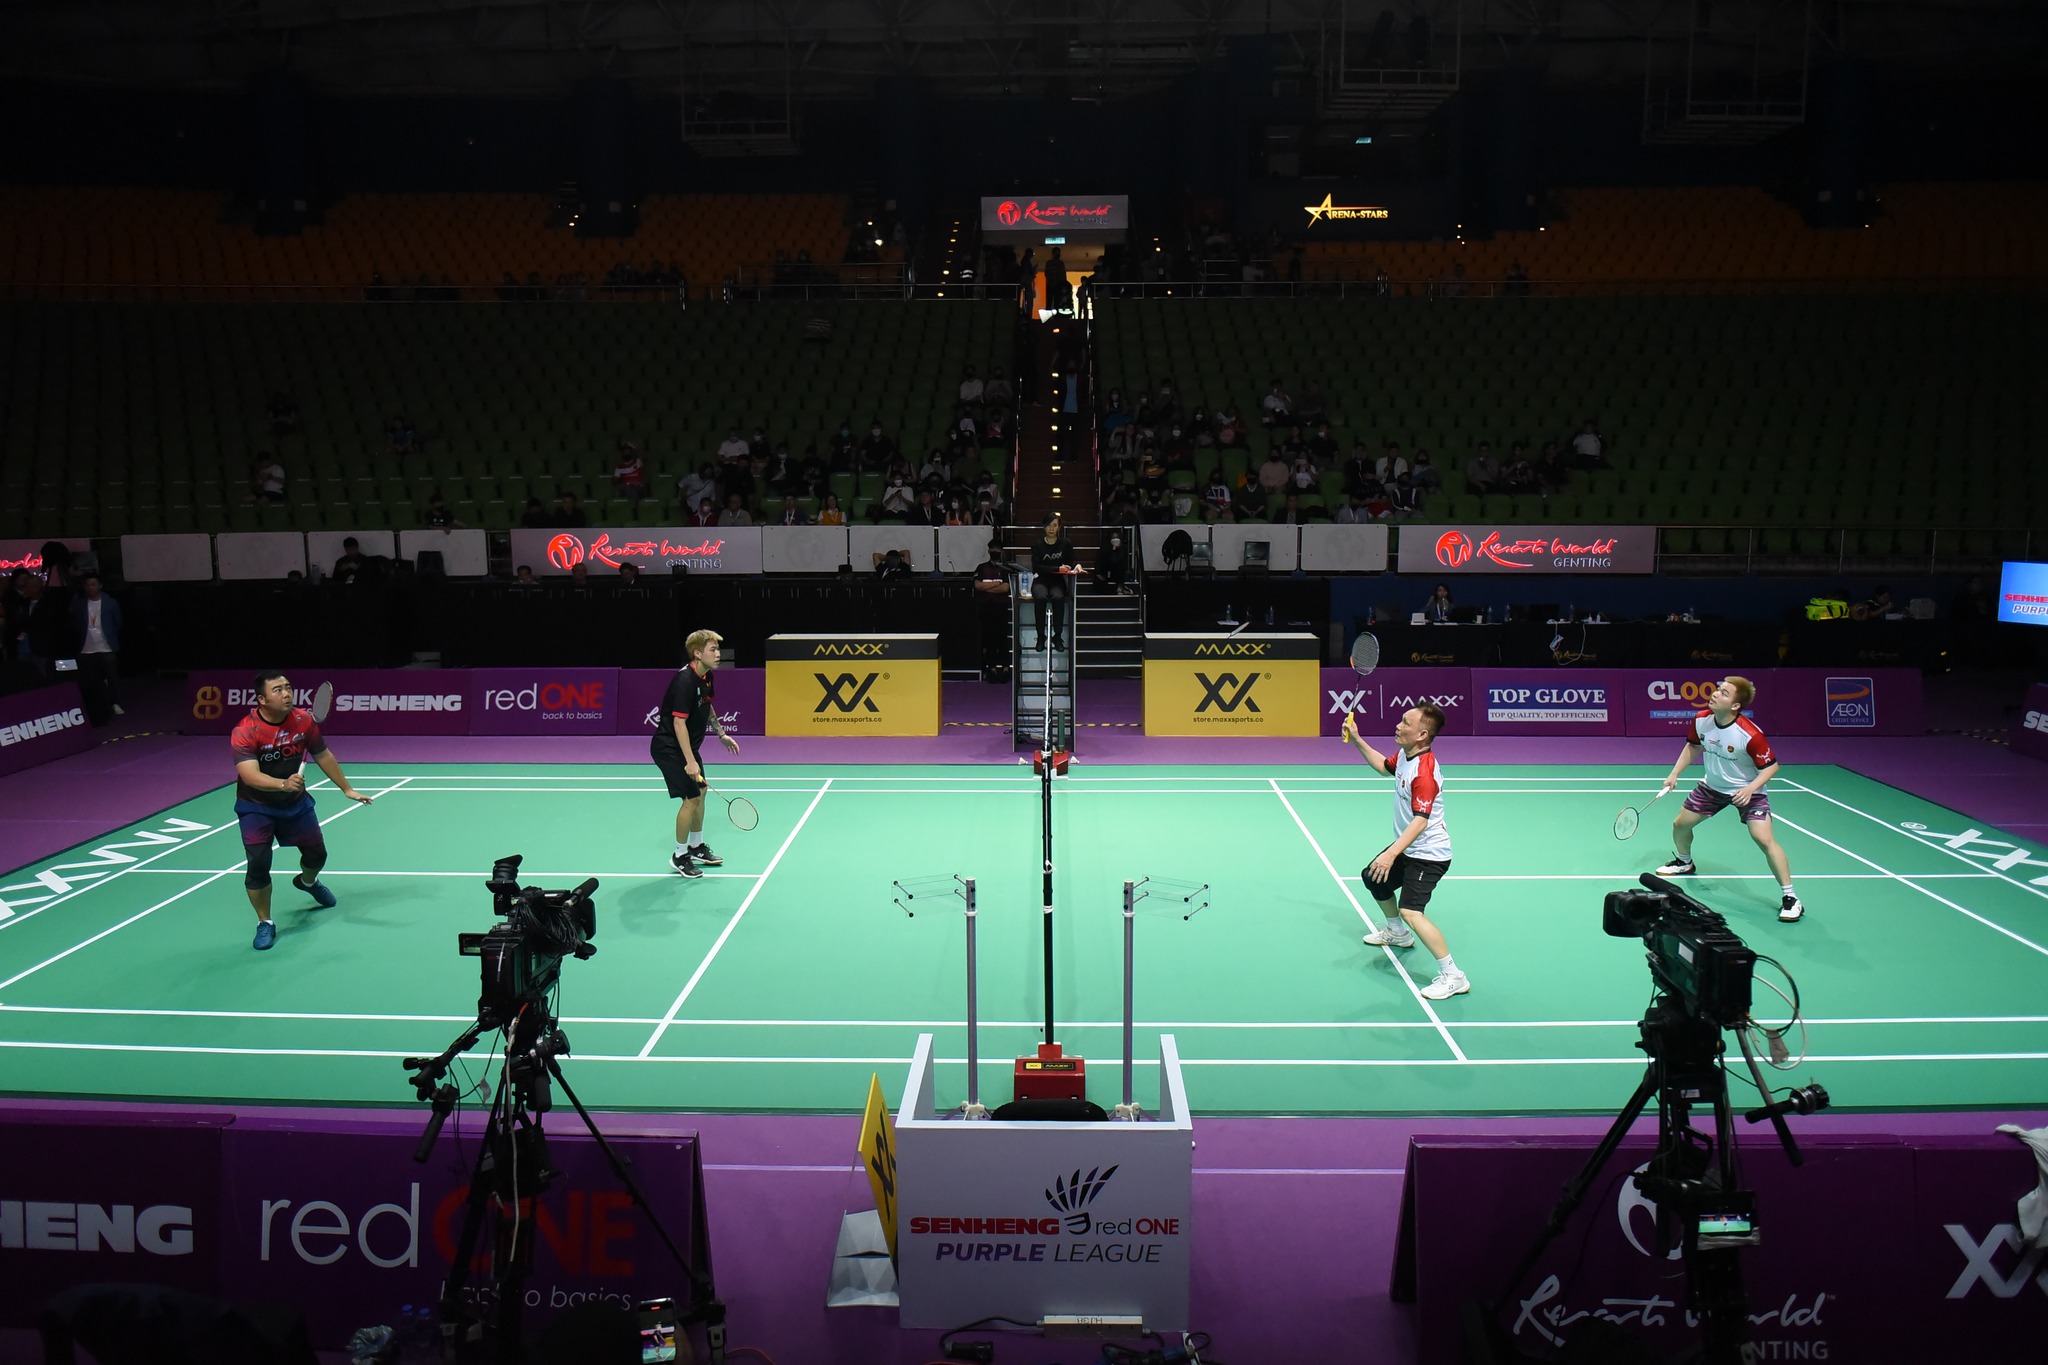 Malaysia Purple League to return with fresh vision for badminton